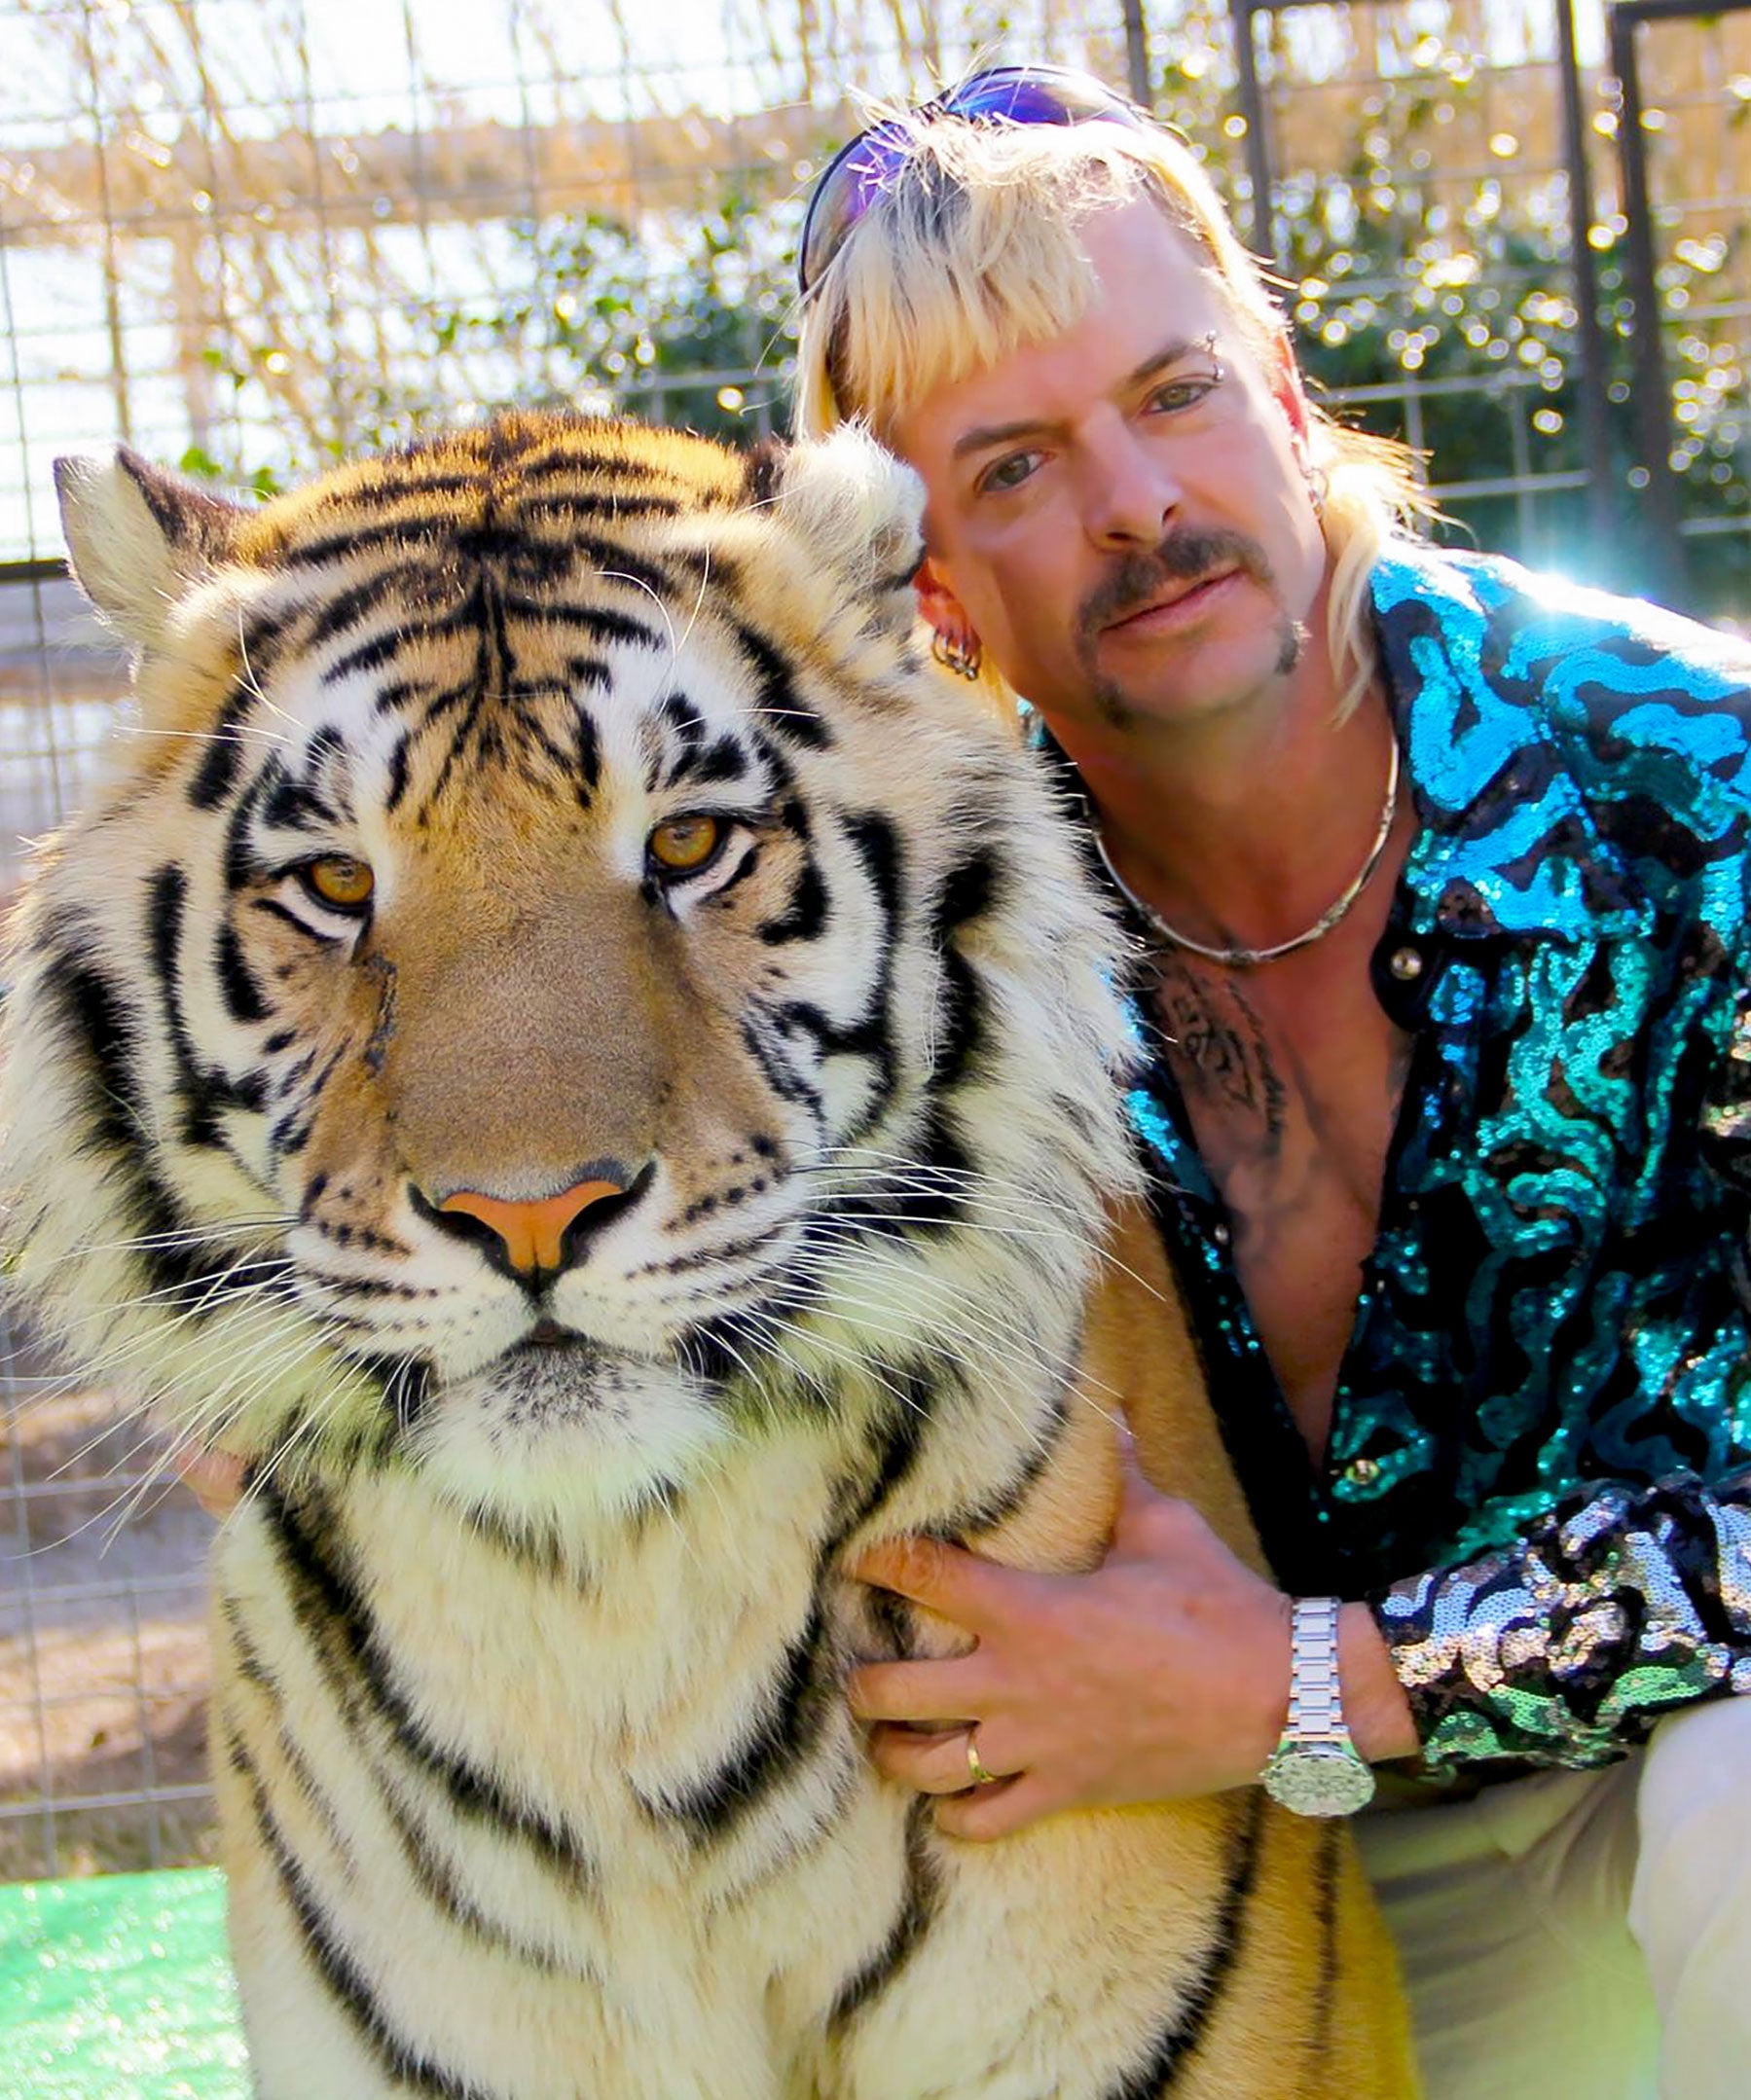 Streanmig Zoo Movies Porno - Who Is Joe Exotic? Netflix New Tiger King Doc Explained